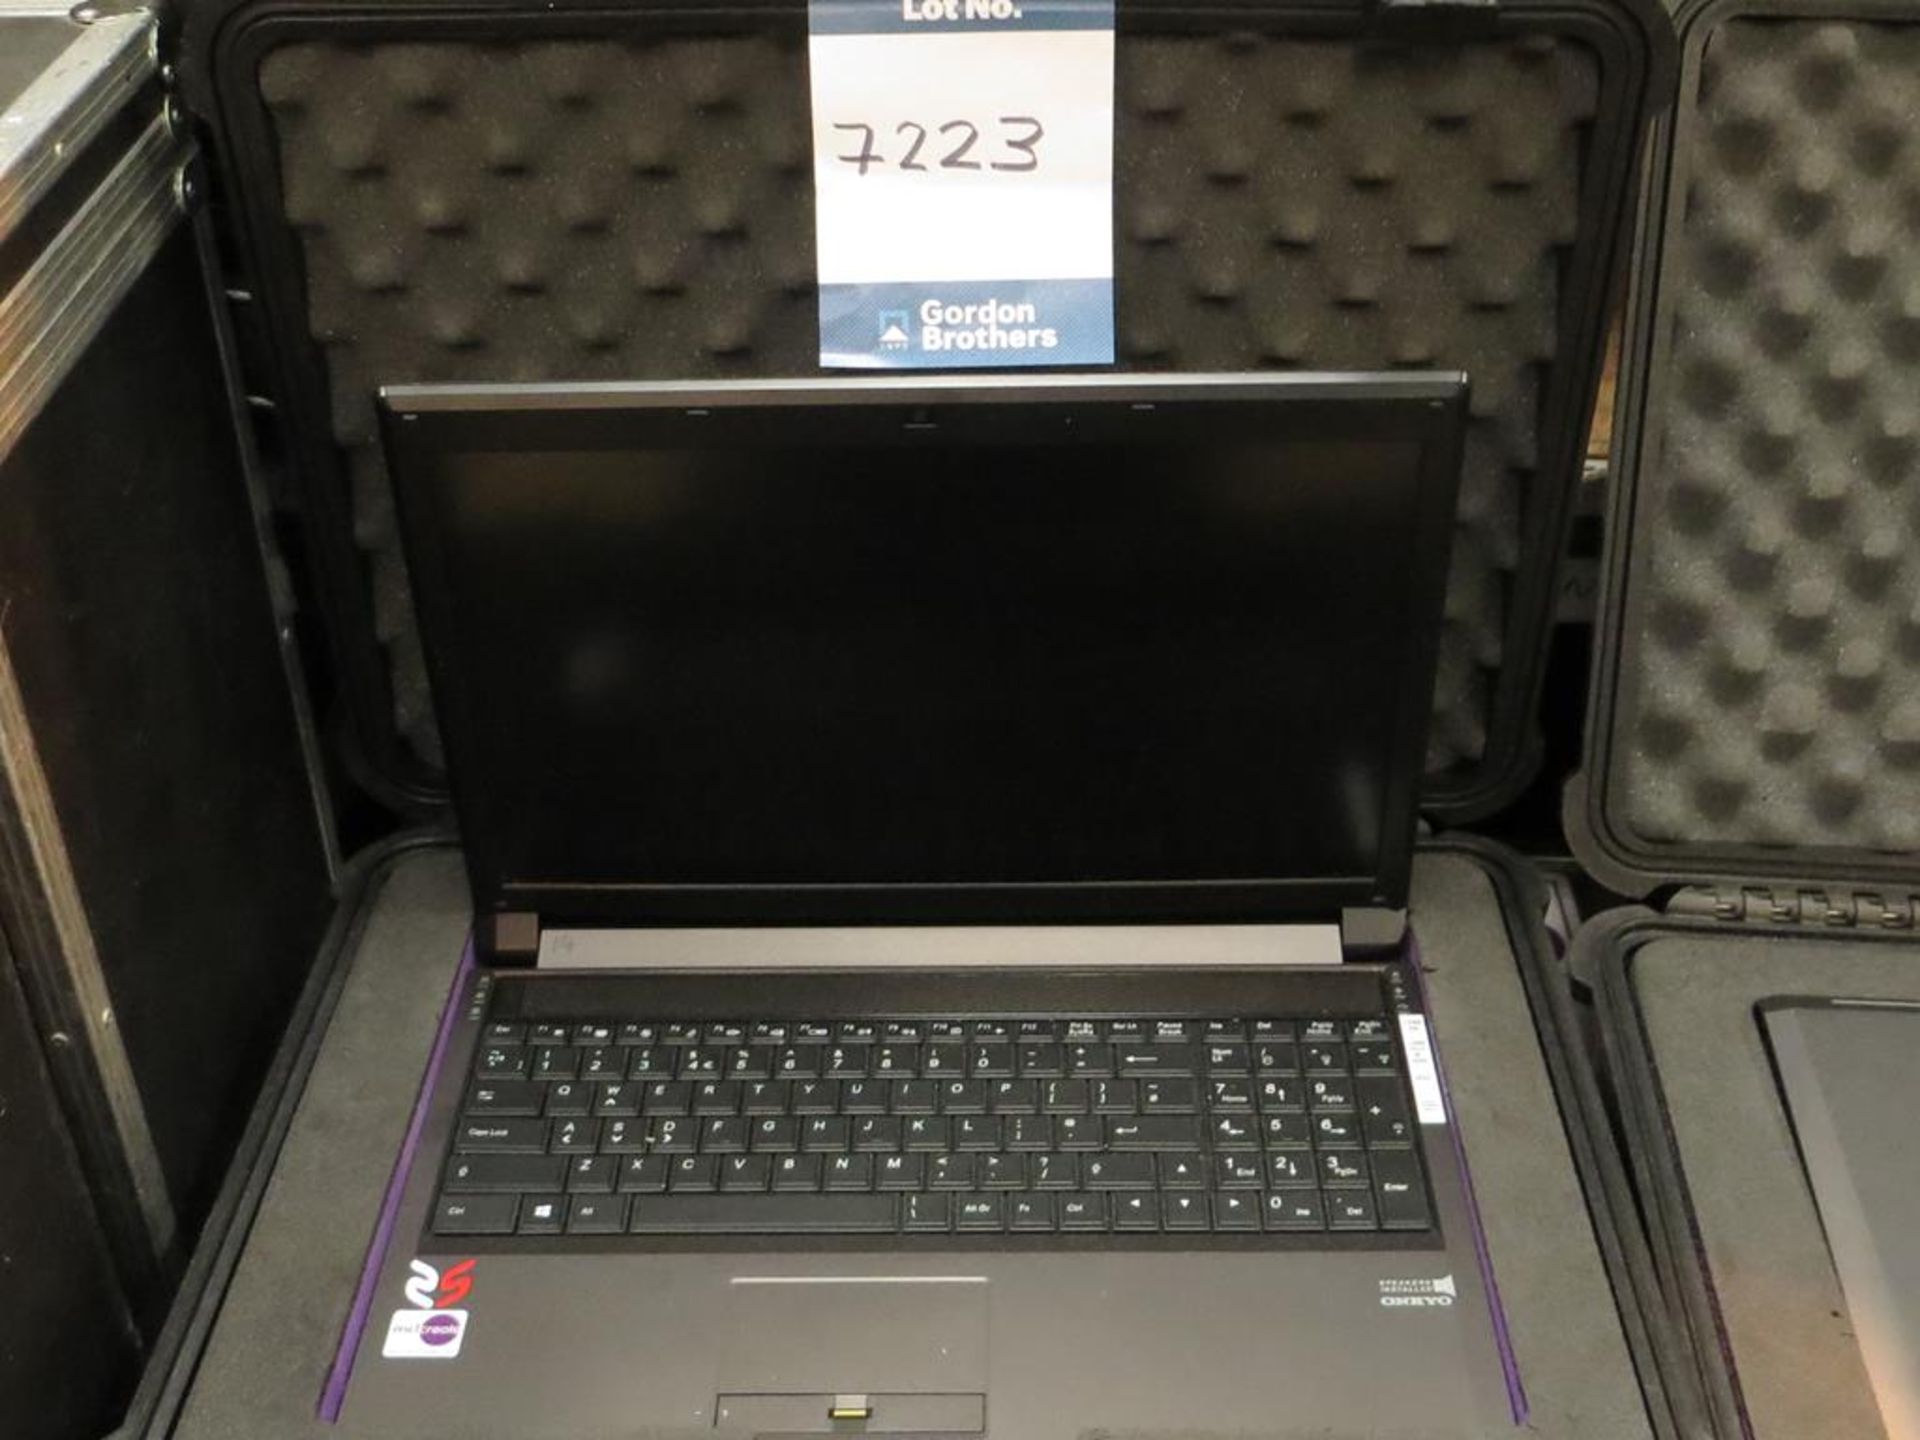 Workstation Specialists, Model P150SM laptop, 15" i7, 2.5GHz, 16gb RAM, 180 GB HD in transit case: - Image 2 of 3